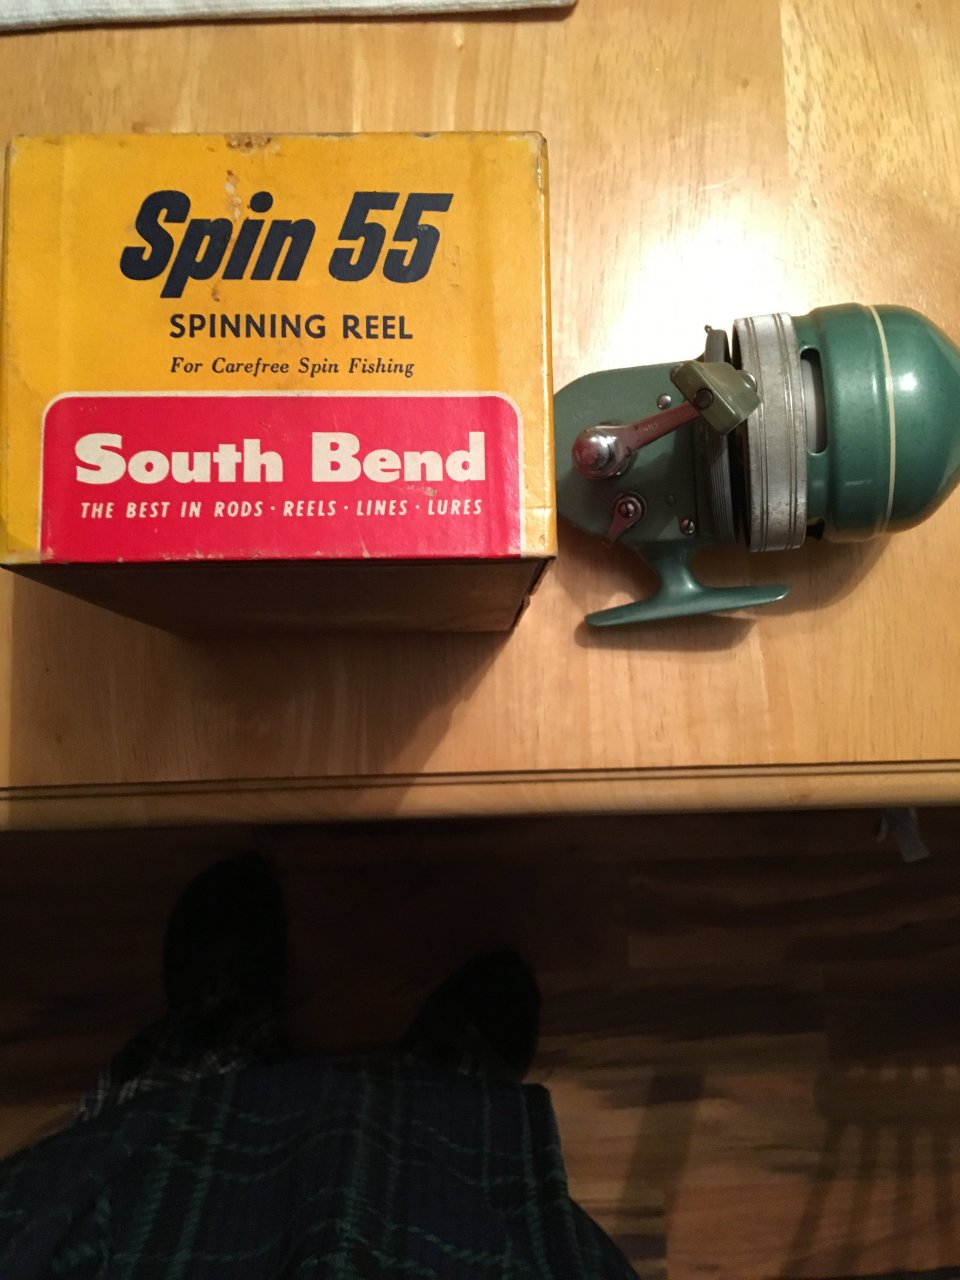 I Have A South Bend Spin 55 Reel. Would Anyone Know What Year It Was Made?